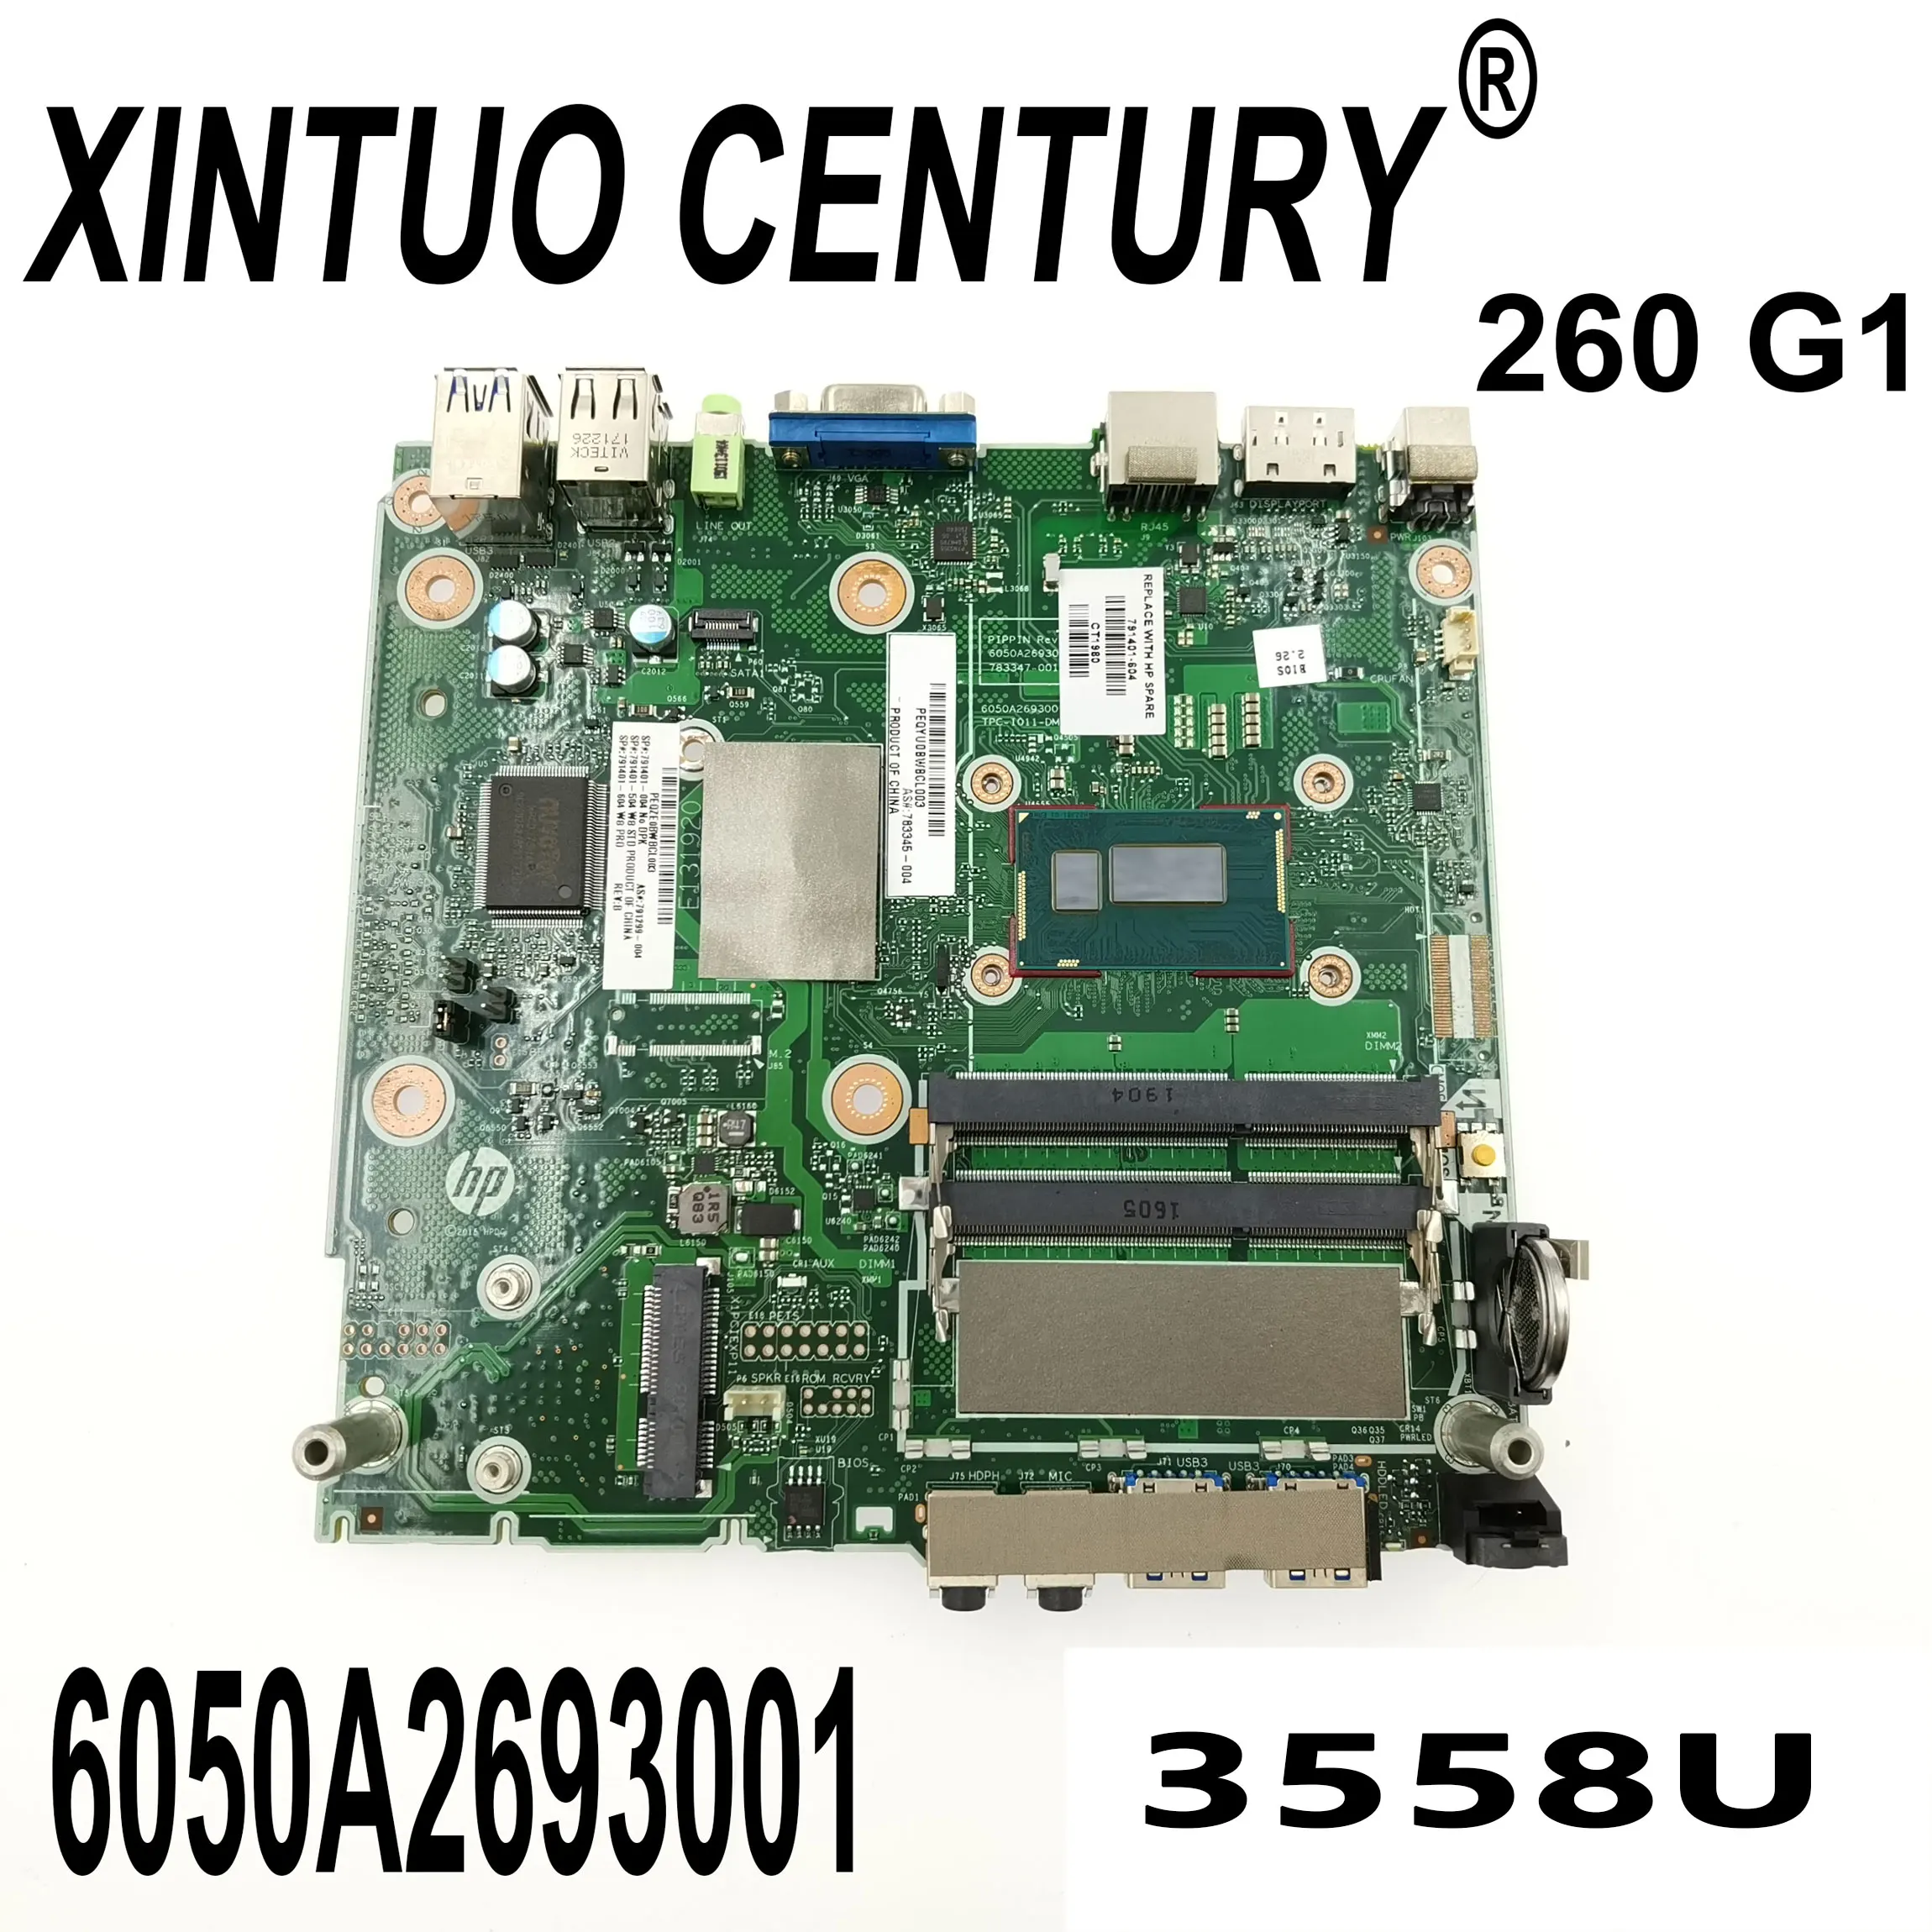 

791401-001 783345-001 783347-001 For HP 260 G1 TPN-I011 Laptop Motherboard 6050A2693001-MB-A02 with SR1E8 3558U 100% Test Work